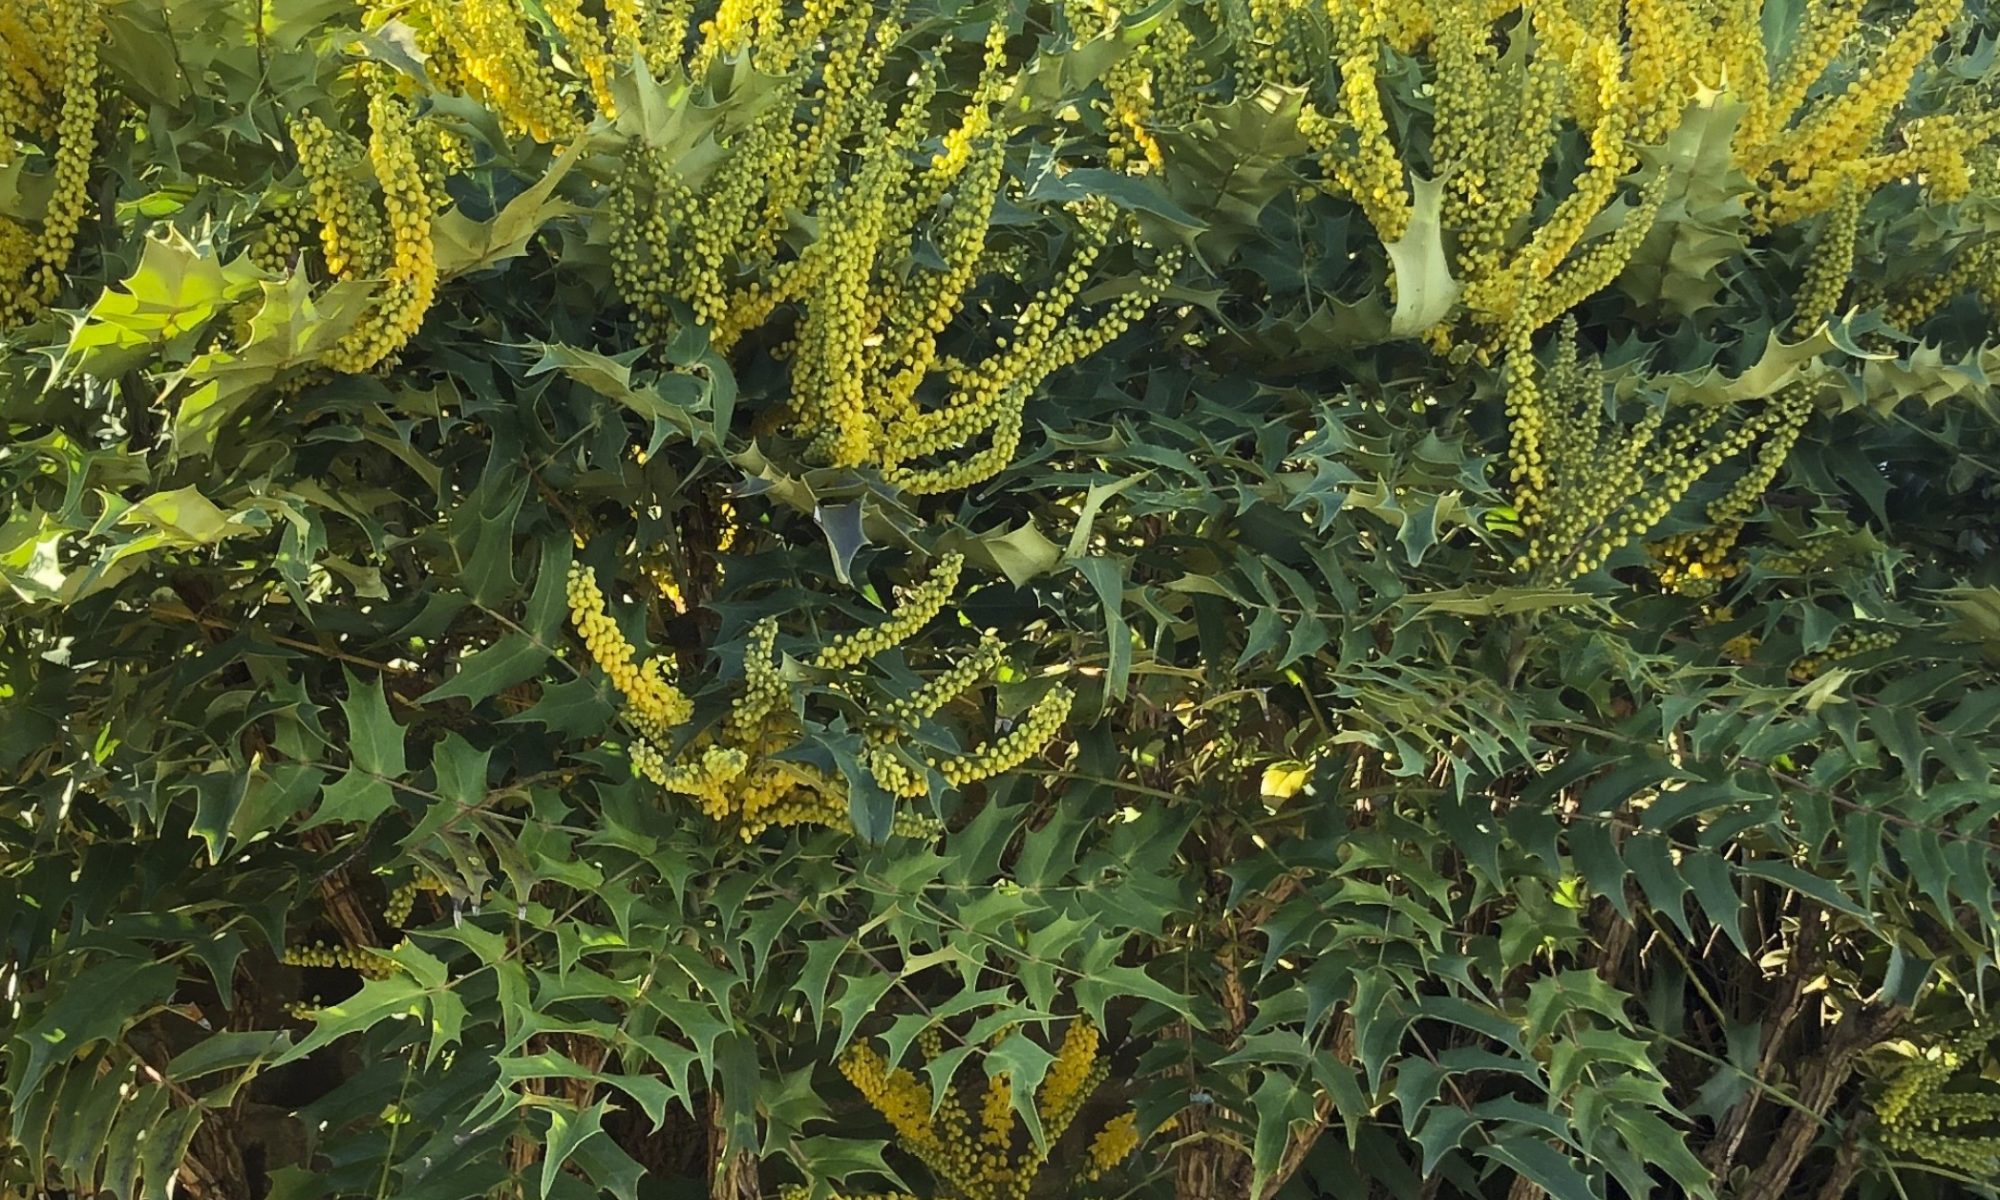 The spiky sunburst flowers of Mahonia seem incongruous in mid-winter